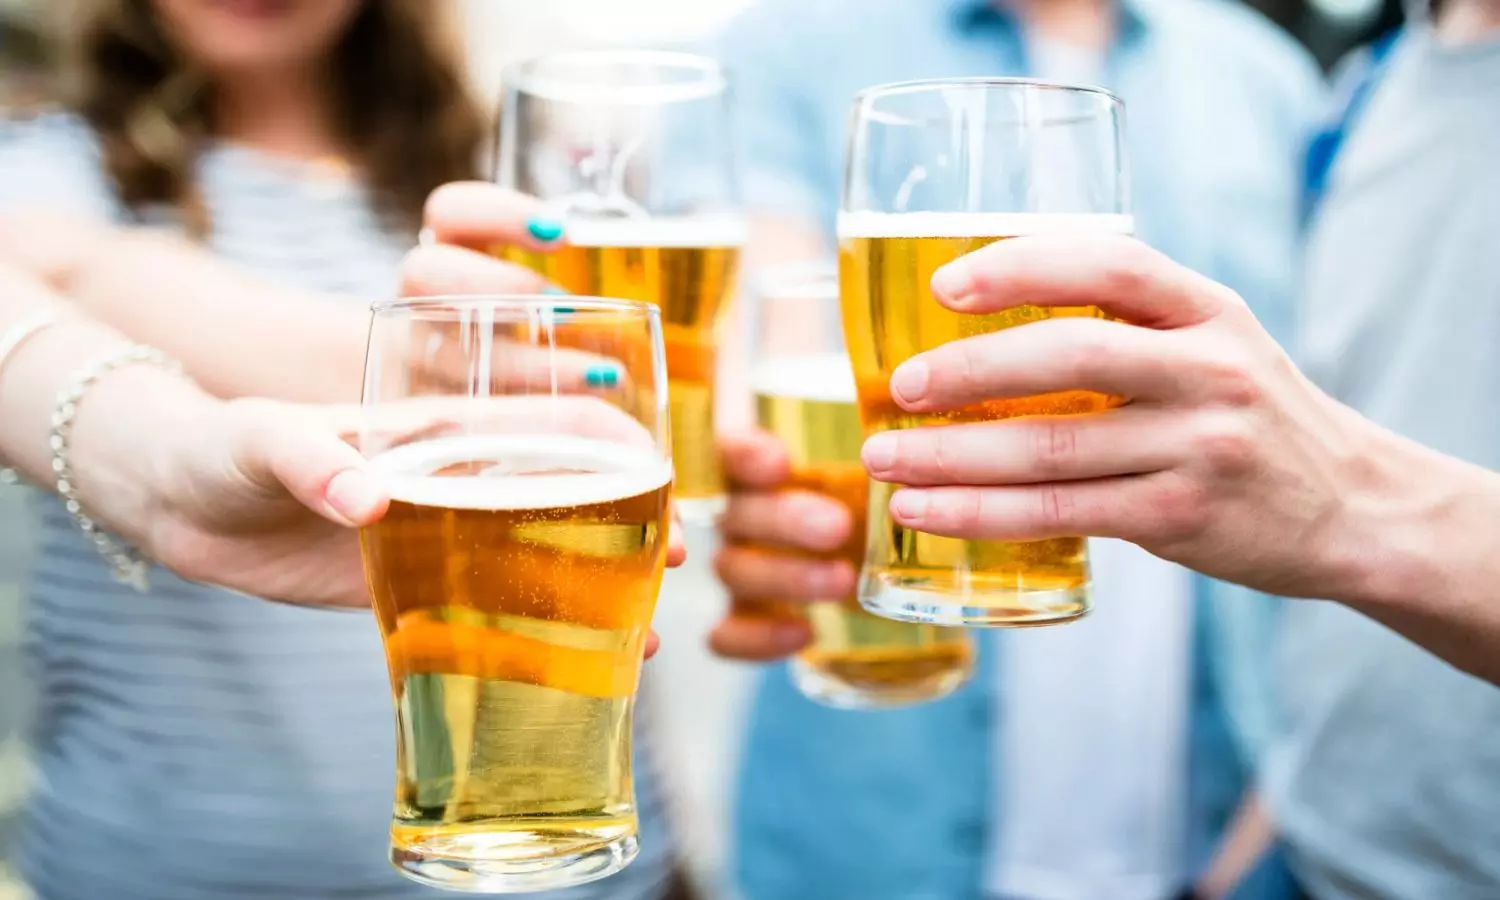 Good News For Beer Lovers If You Drink It In Moderation The Body Will Get These Benefits